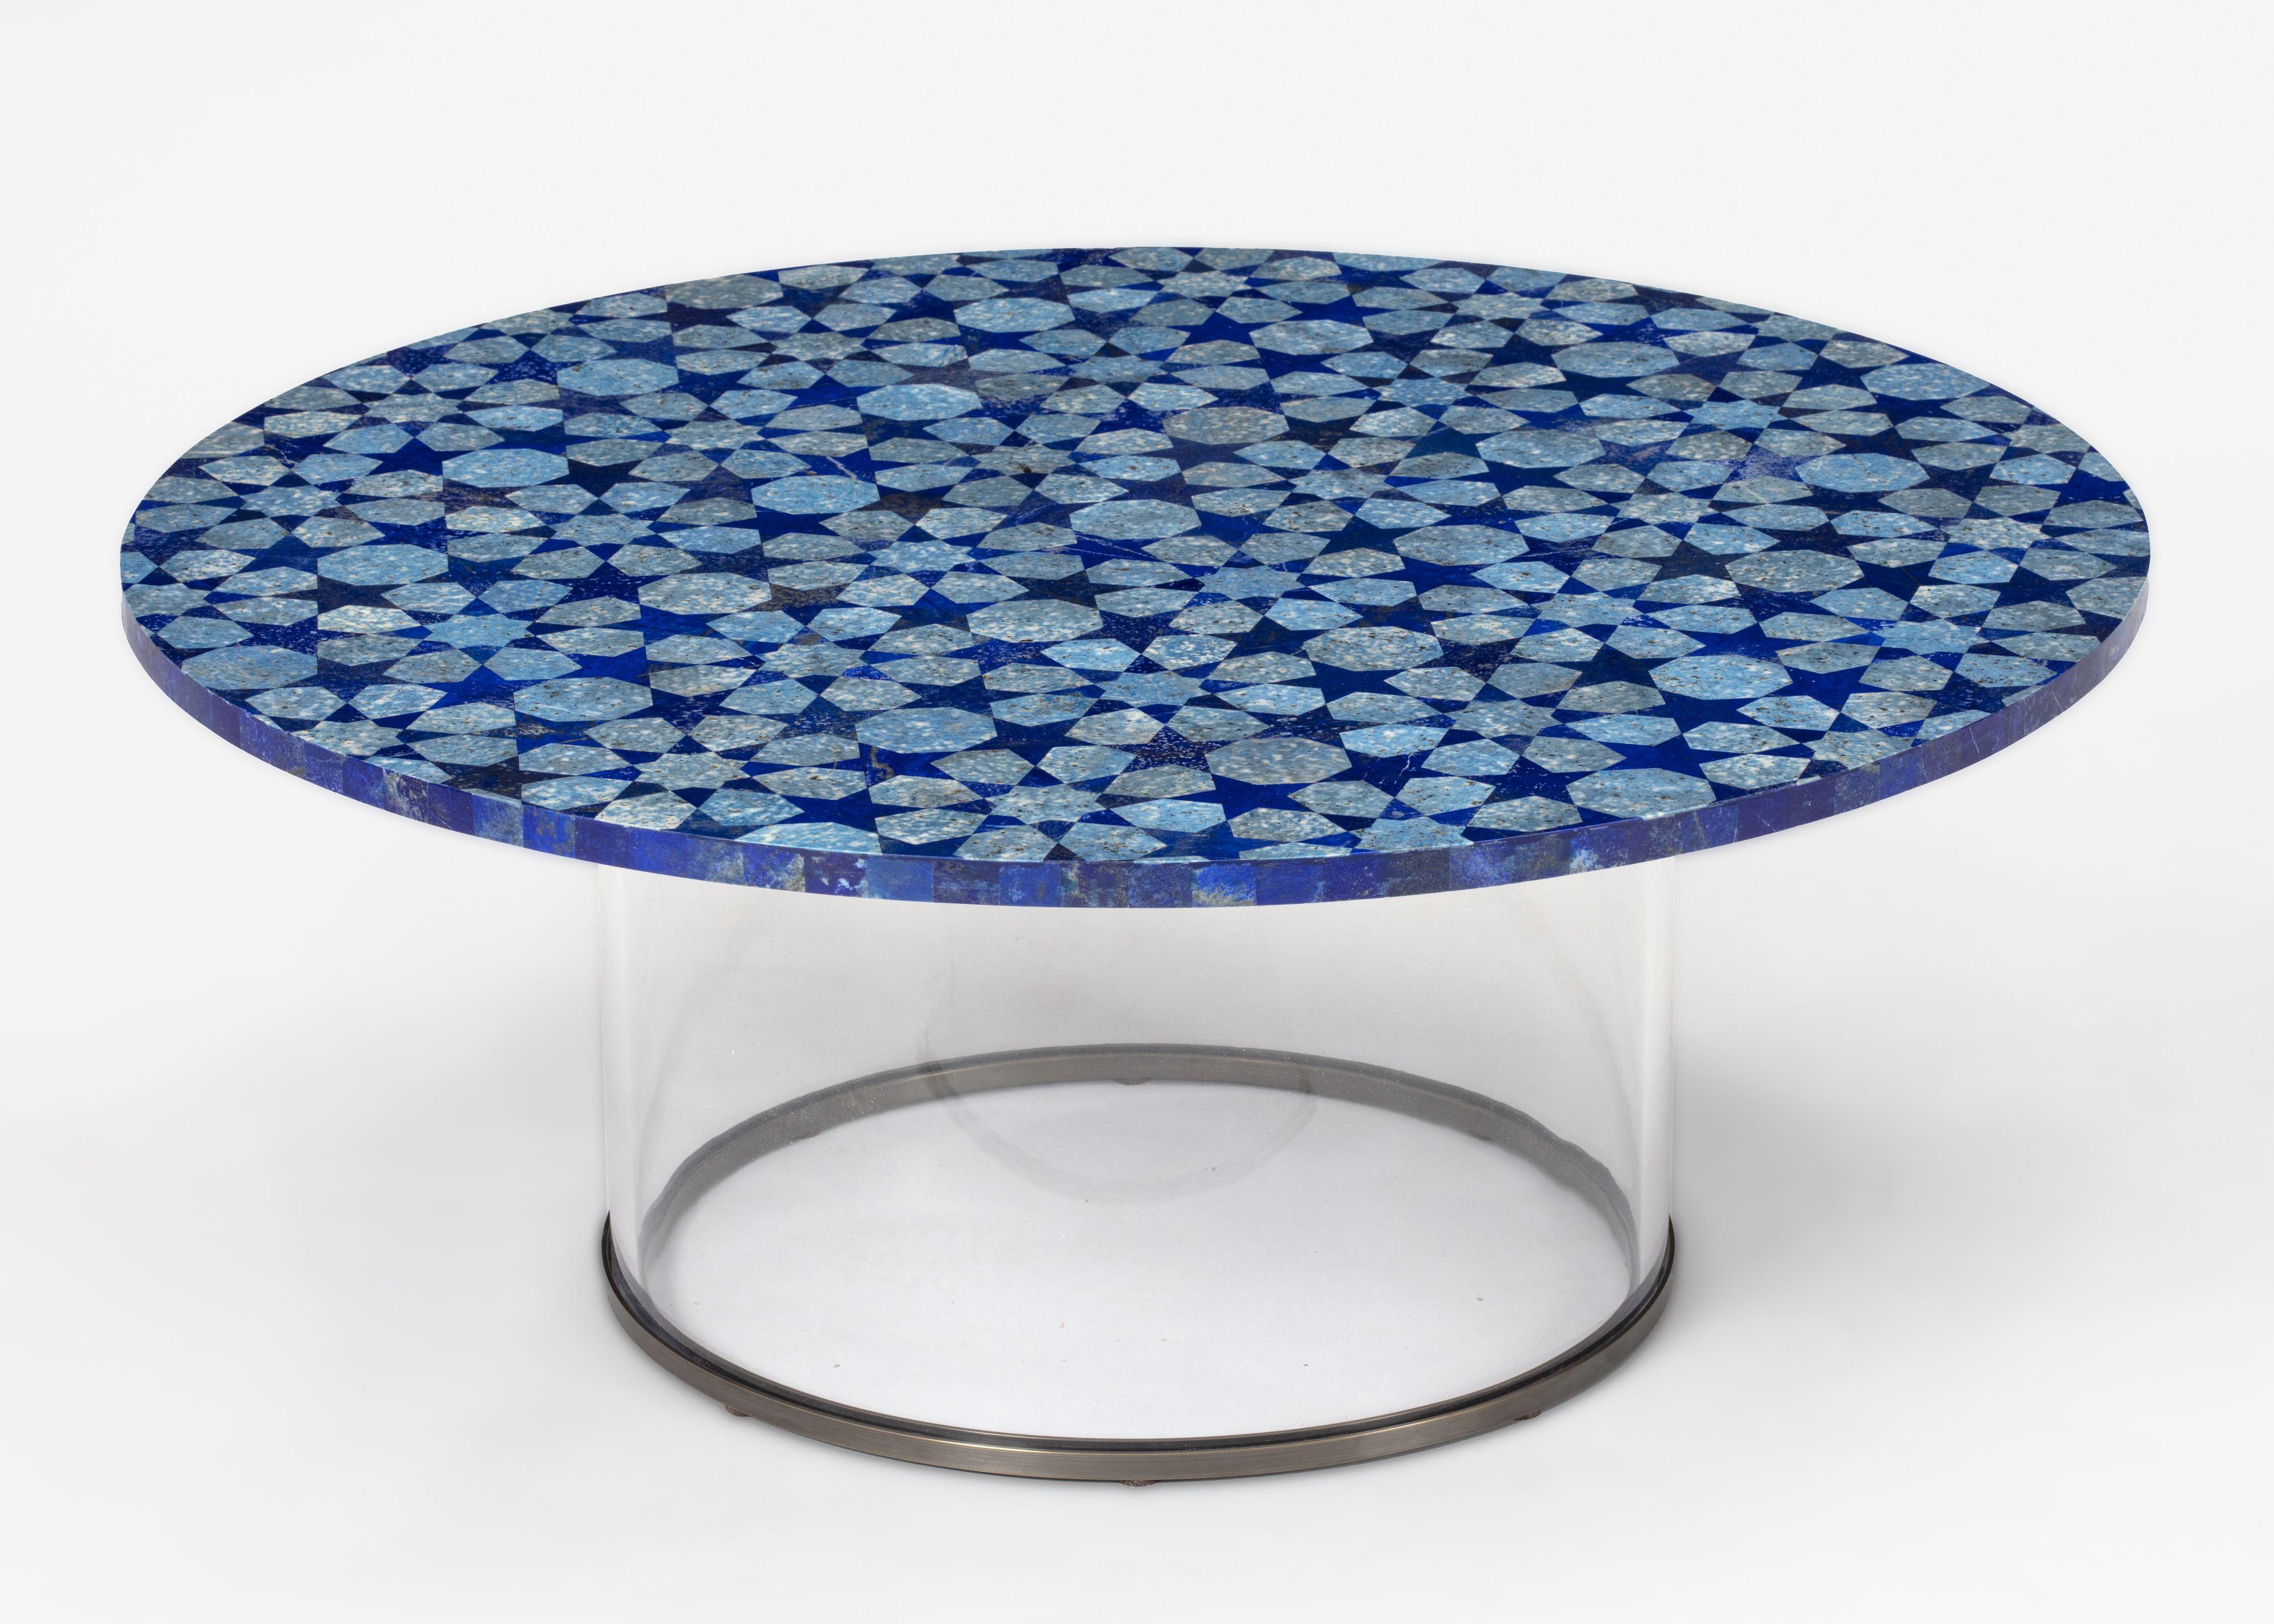 Inspired by the Moghul courts of India, this cocktail table is fabricated with a semi-precious inlaid stone top and plexiglass and bronze base. Made in India.

Finish options:
Green aventurine with green agate.
Lapis Lazuli in two tones.
Available